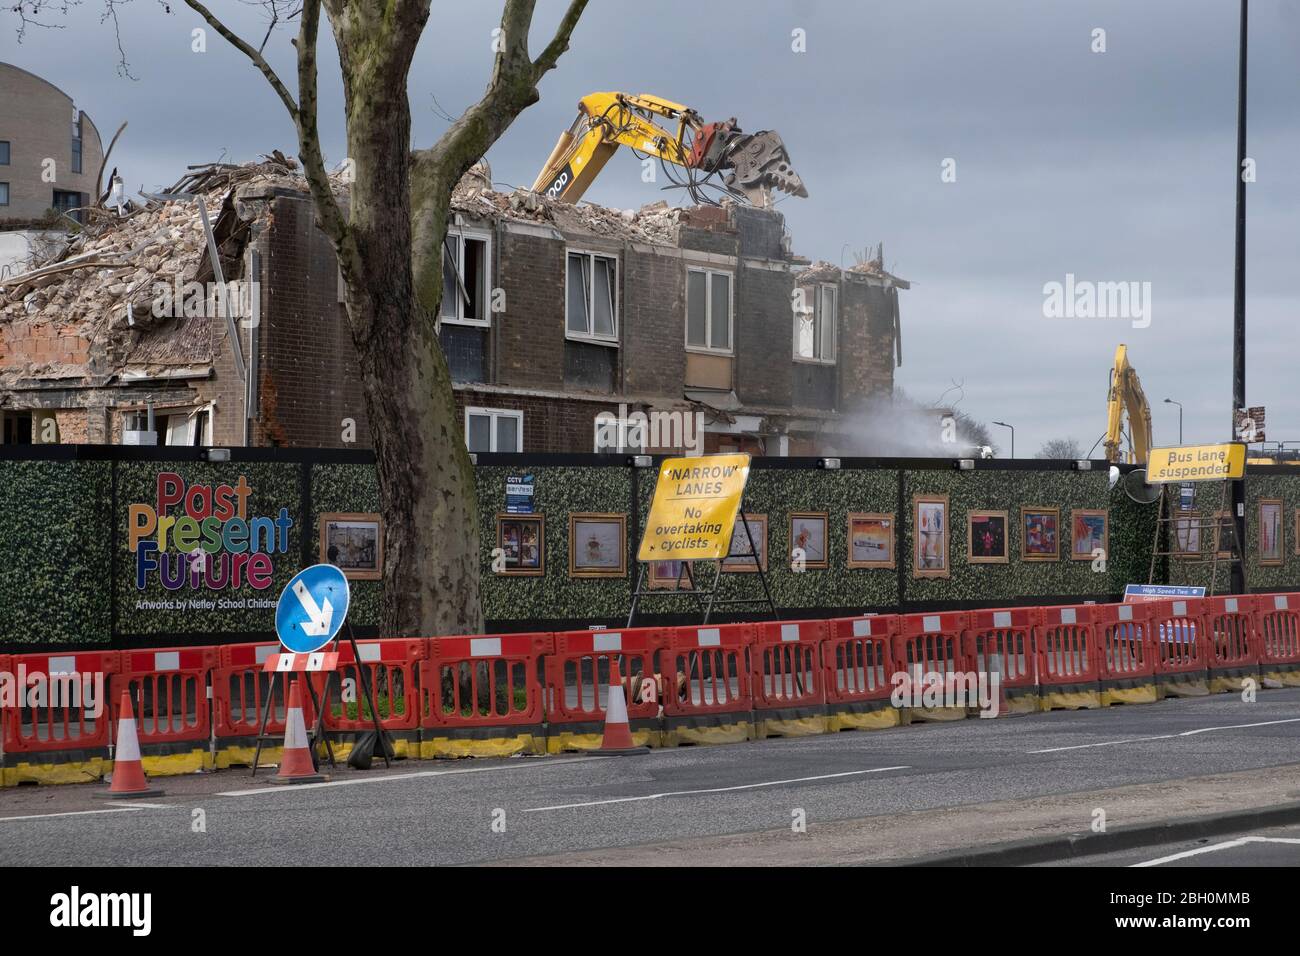 High Speed Two, HS2, demolition of houses on Hampstead Road near Euston to make way for HS2 railway track construction in March 2020 Stock Photo